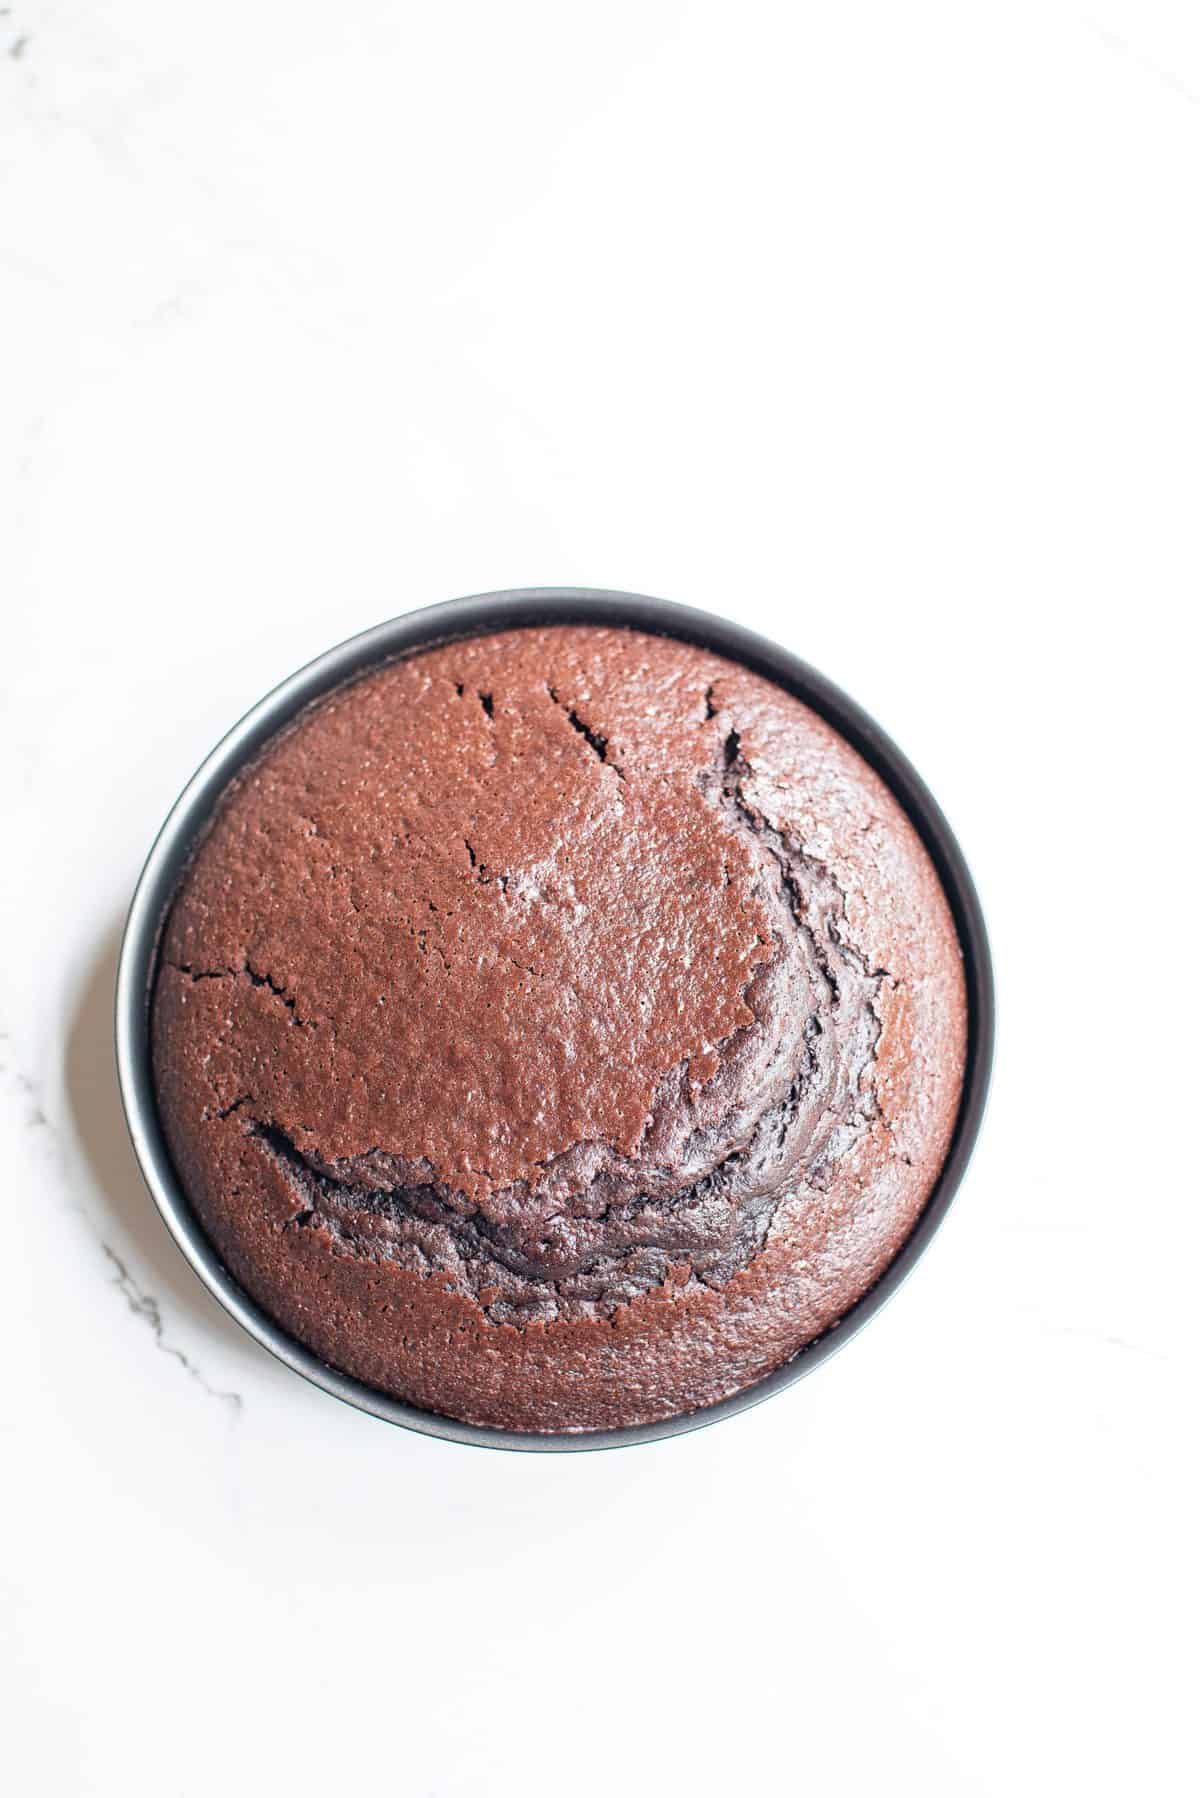 baked chocolate cake in metal tin on white background